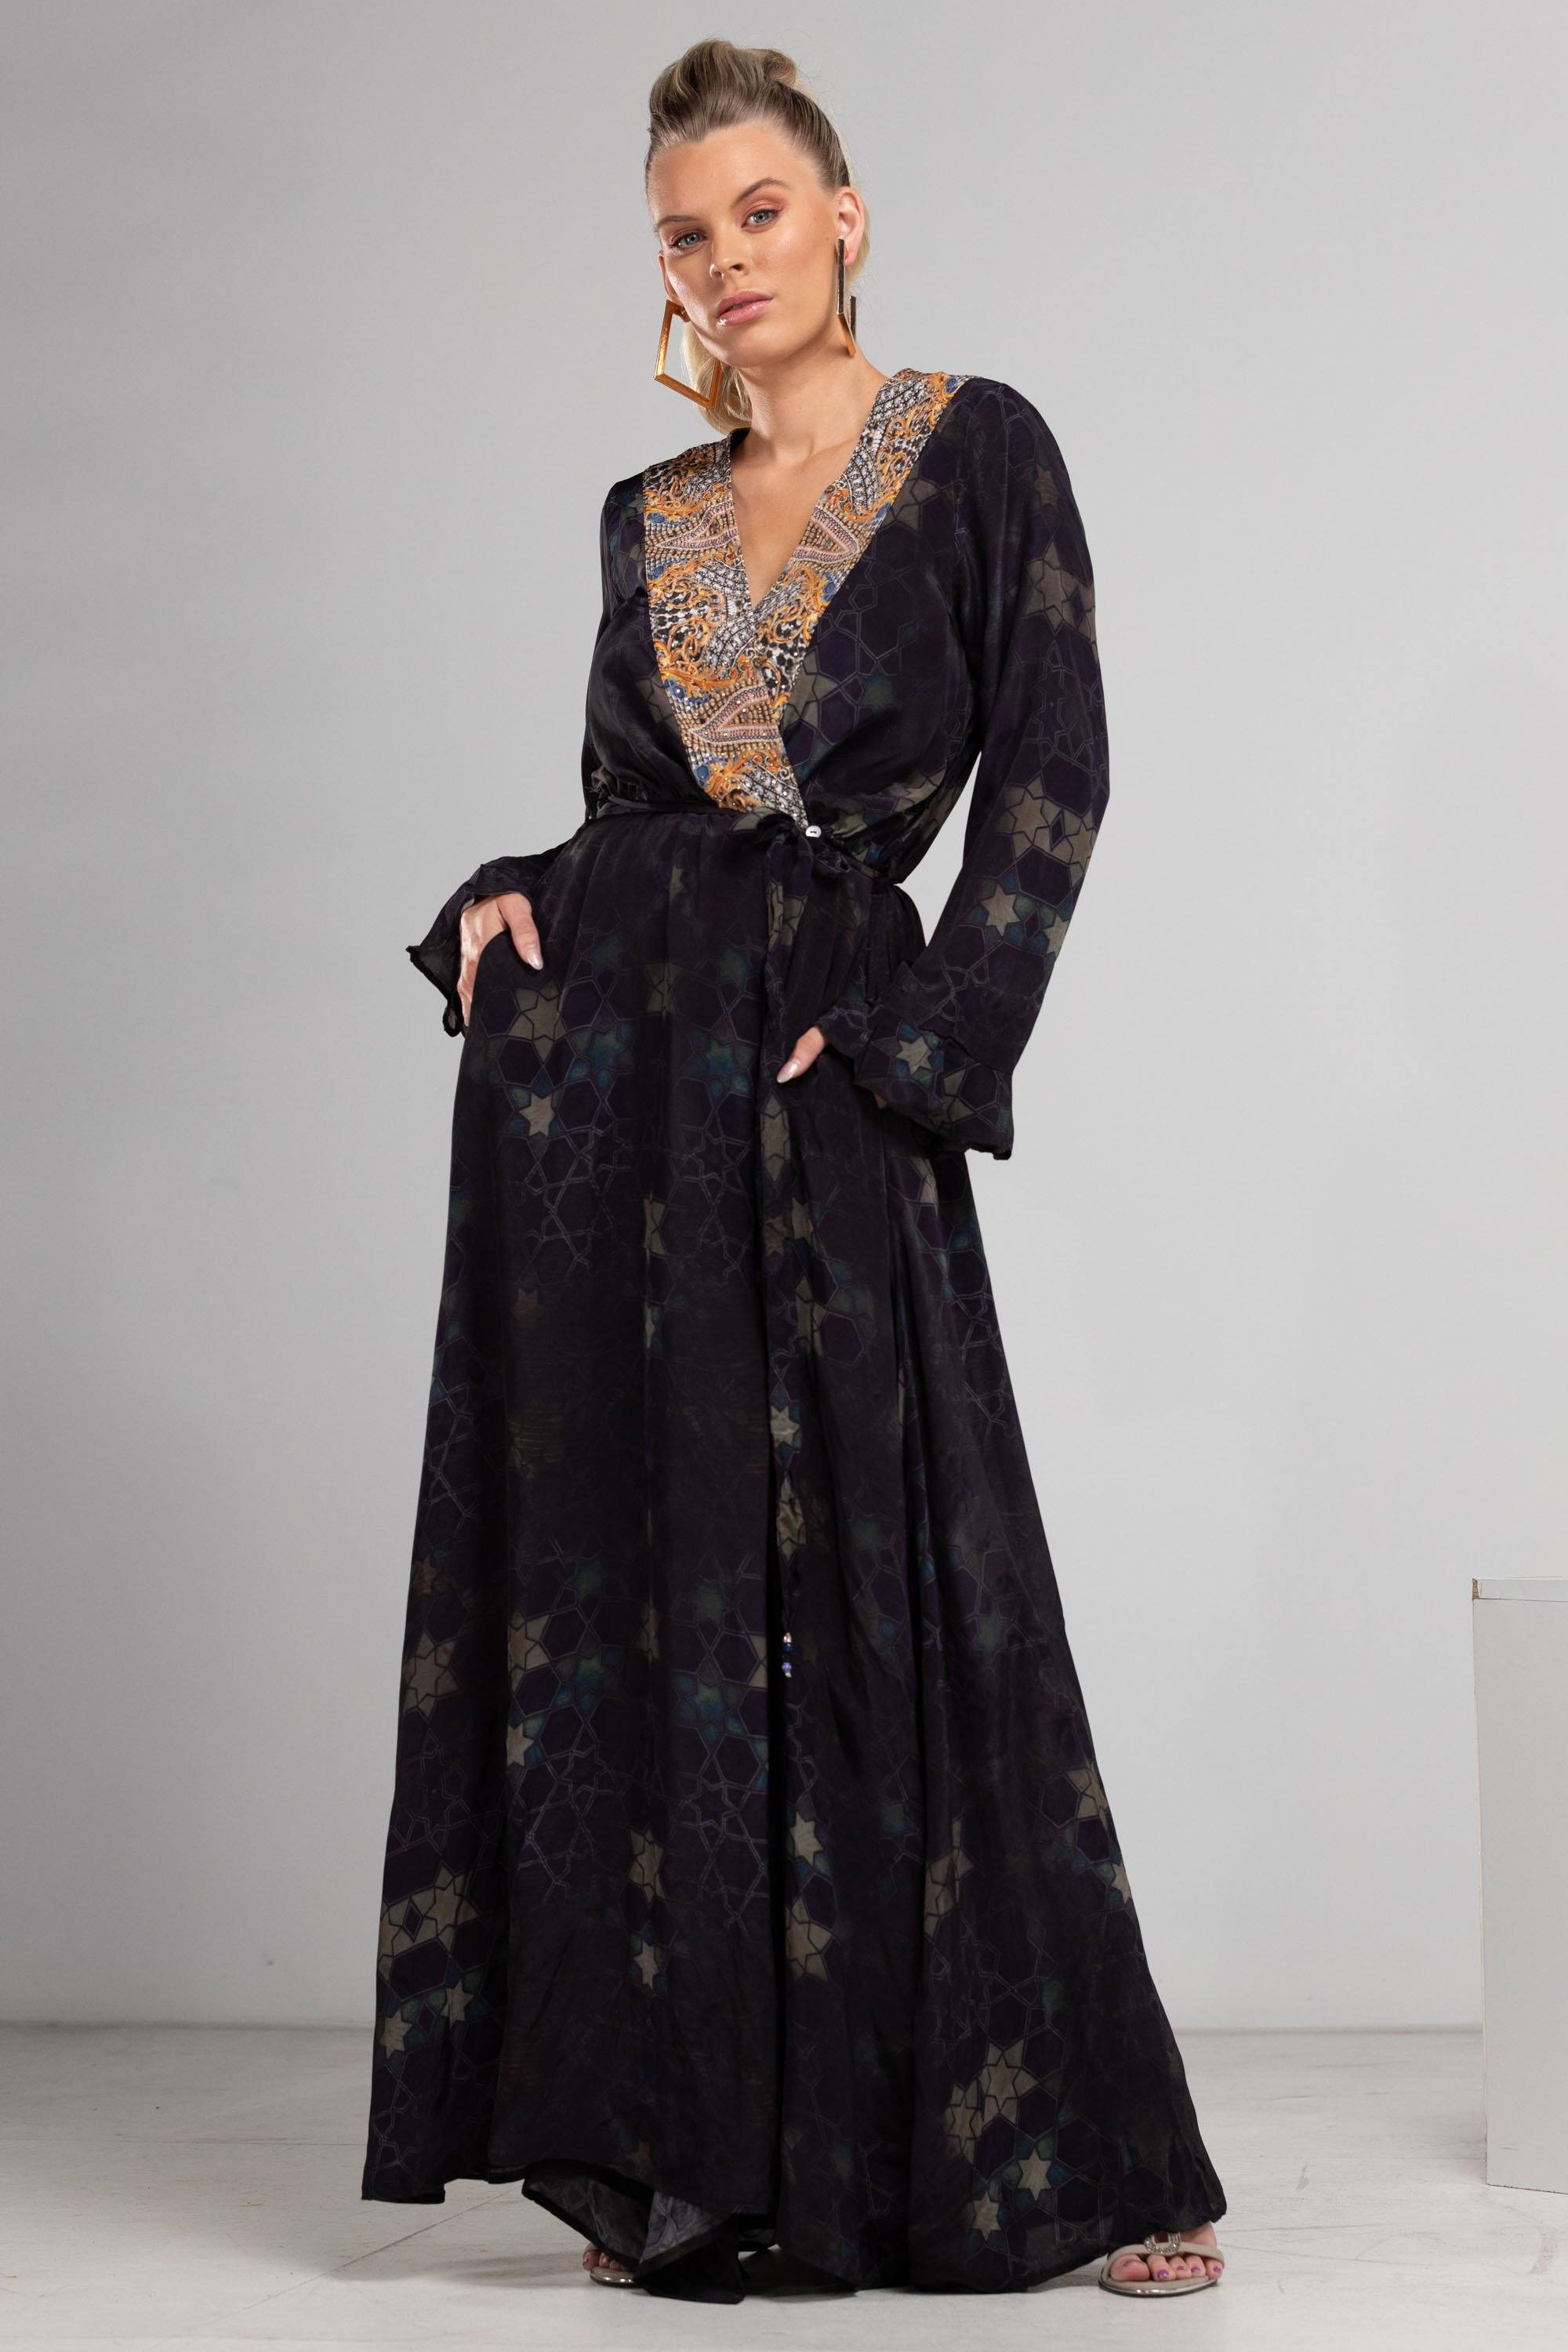 The Luxe Robe